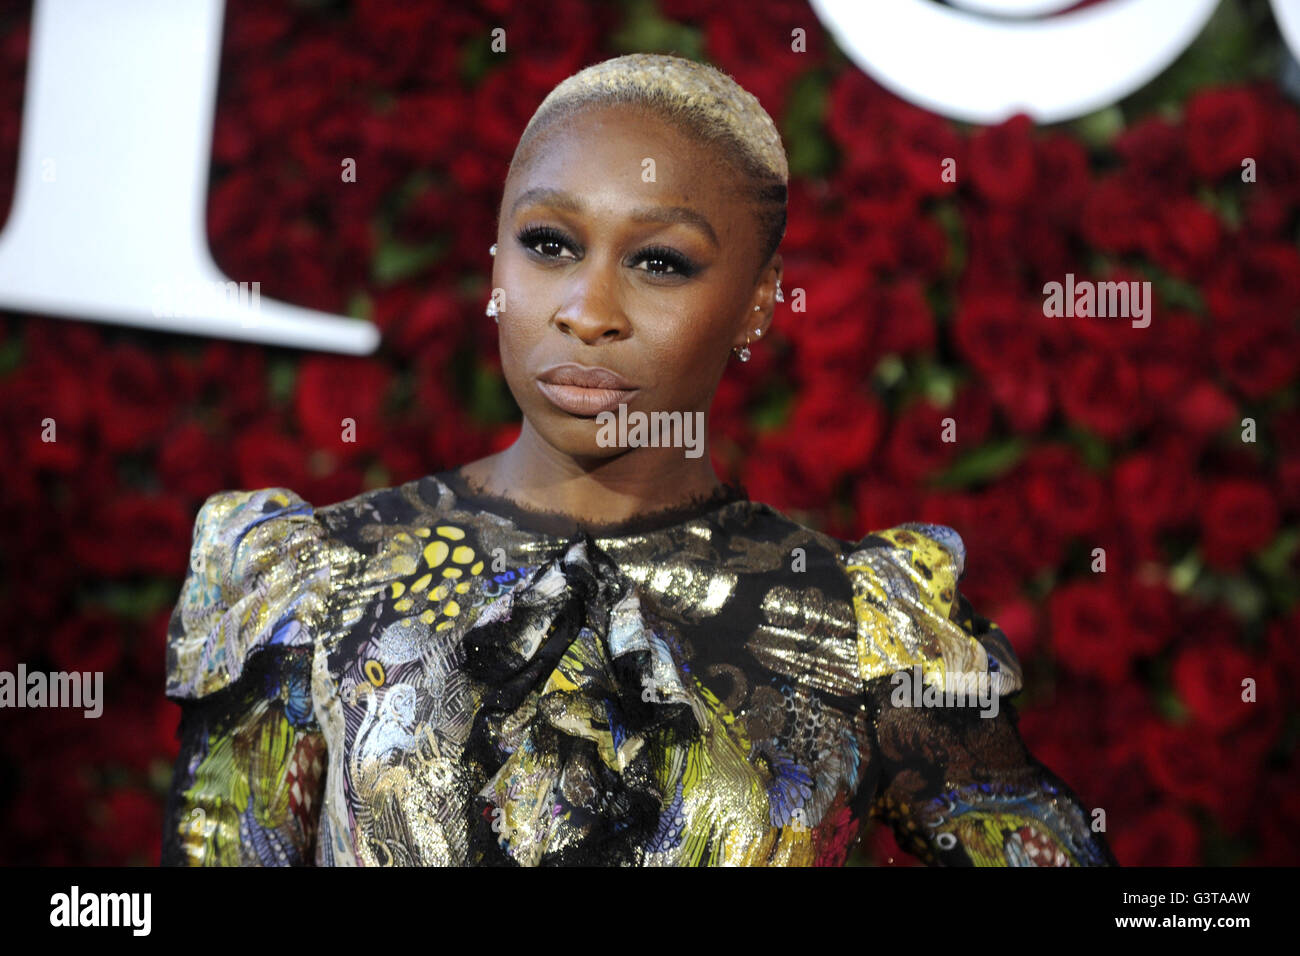 Cynthia Erivo attending the 70th Annual Tony Awards at Beacon Theatre on June 12, 2016 in New York City. | Verwendung weltweit Stock Photo